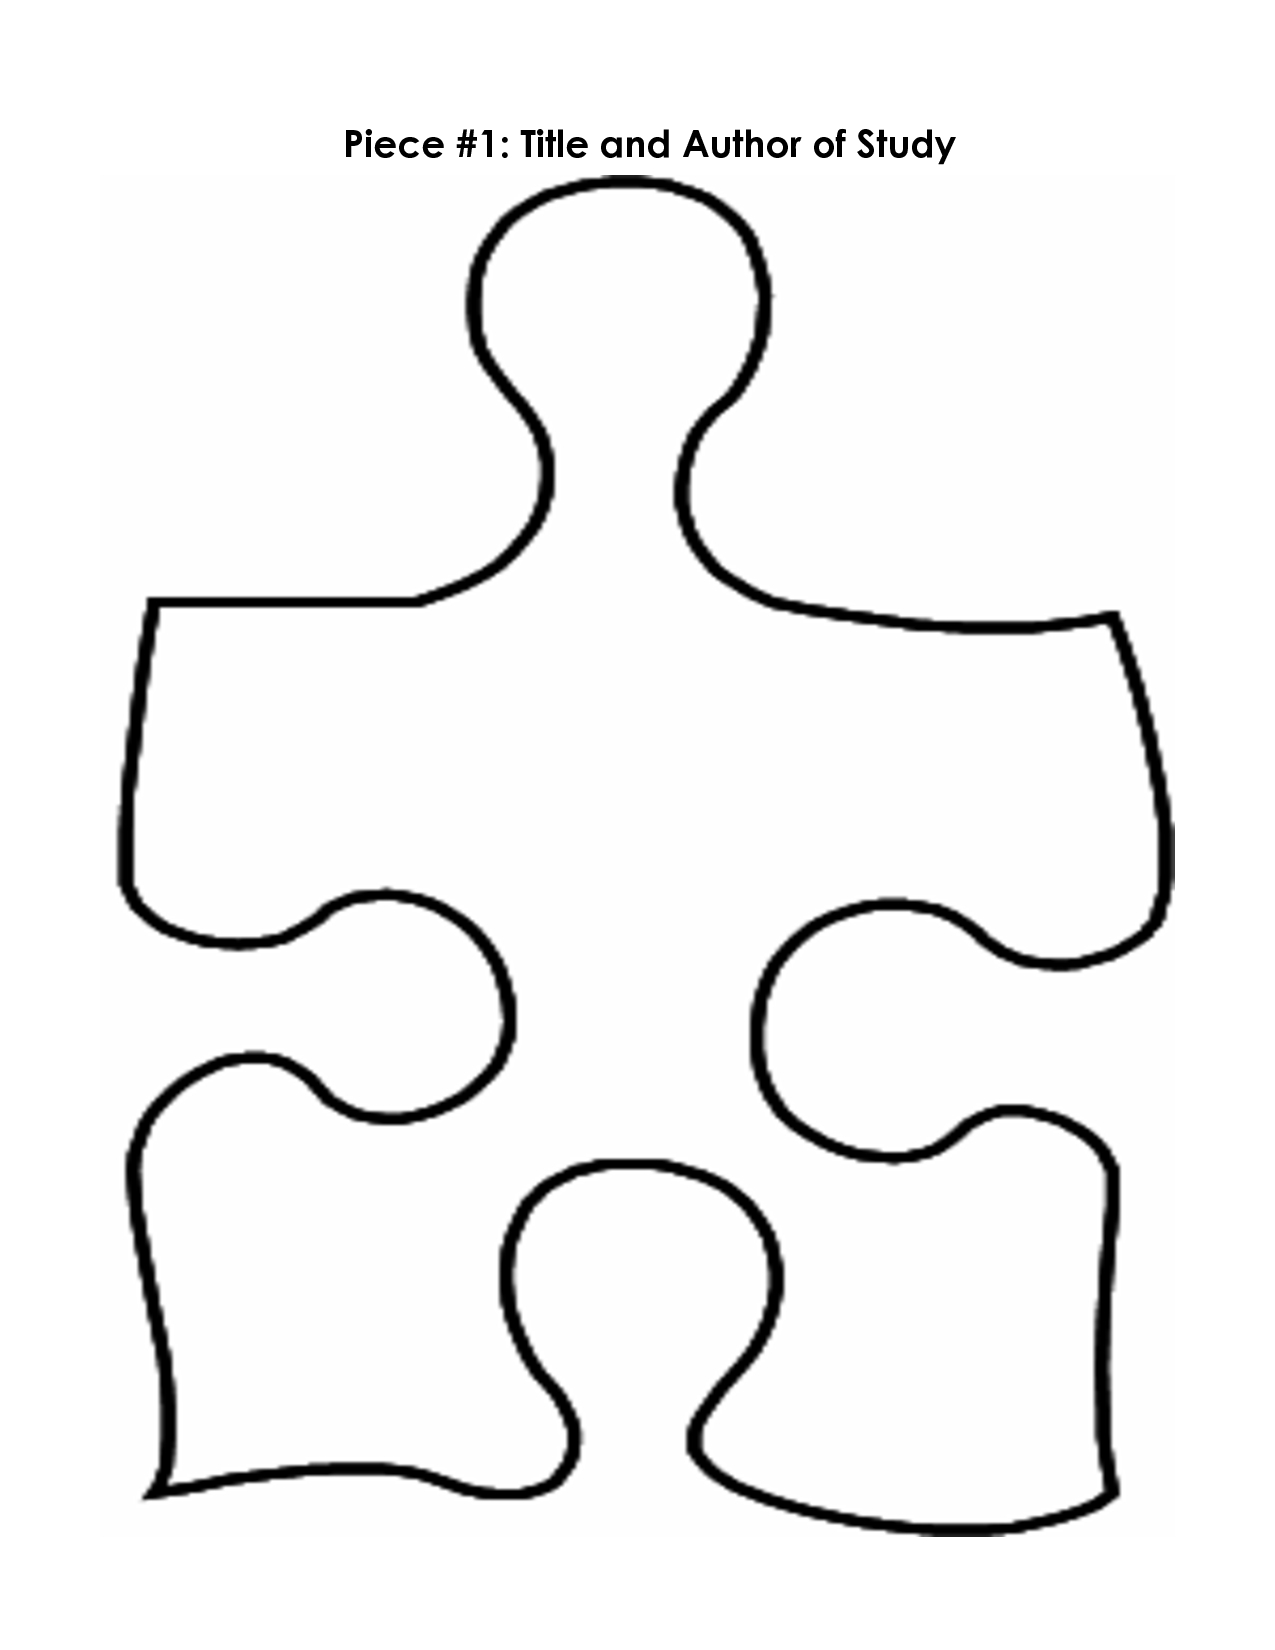 Free Puzzle Pieces Template, Download Free Clip Art, Free Clip Art - 2 Piece Puzzle Printable